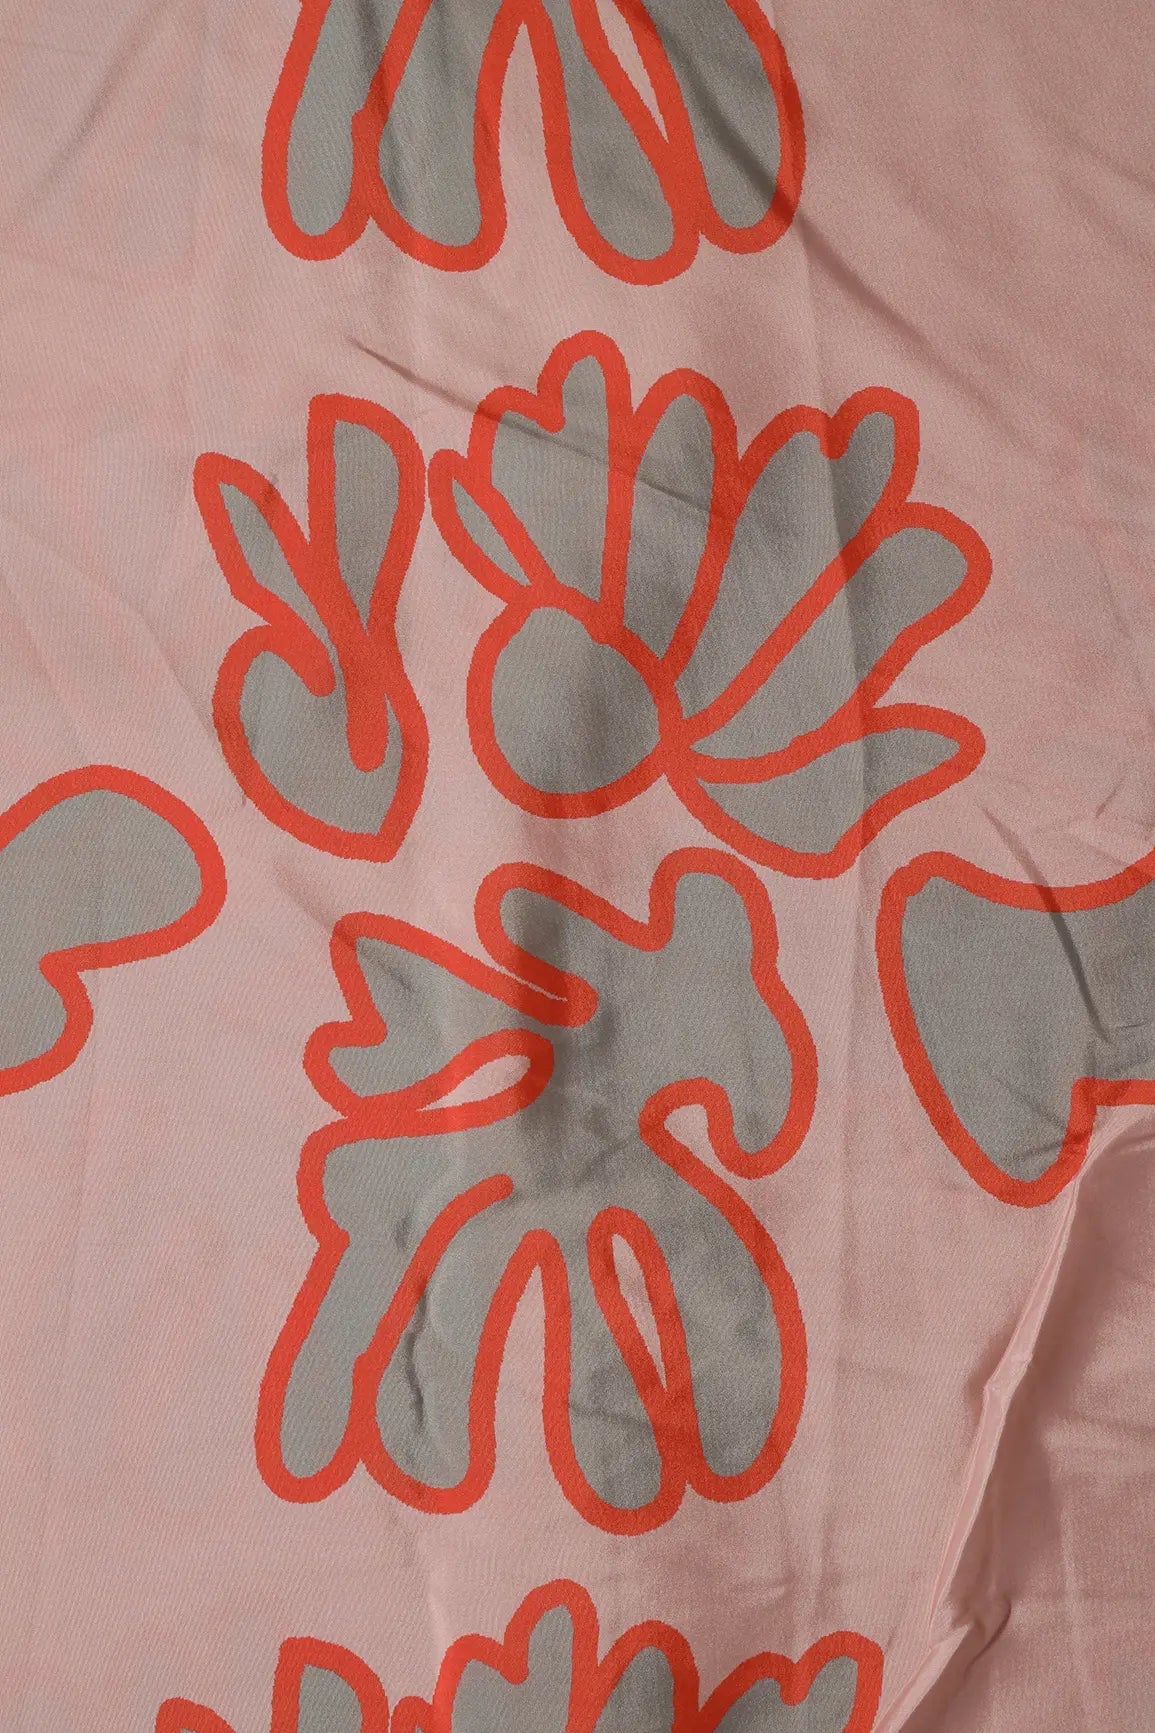 Pastel Peach And Orange Floral Pattern Digital Print On French Crepe Fabric - doeraa